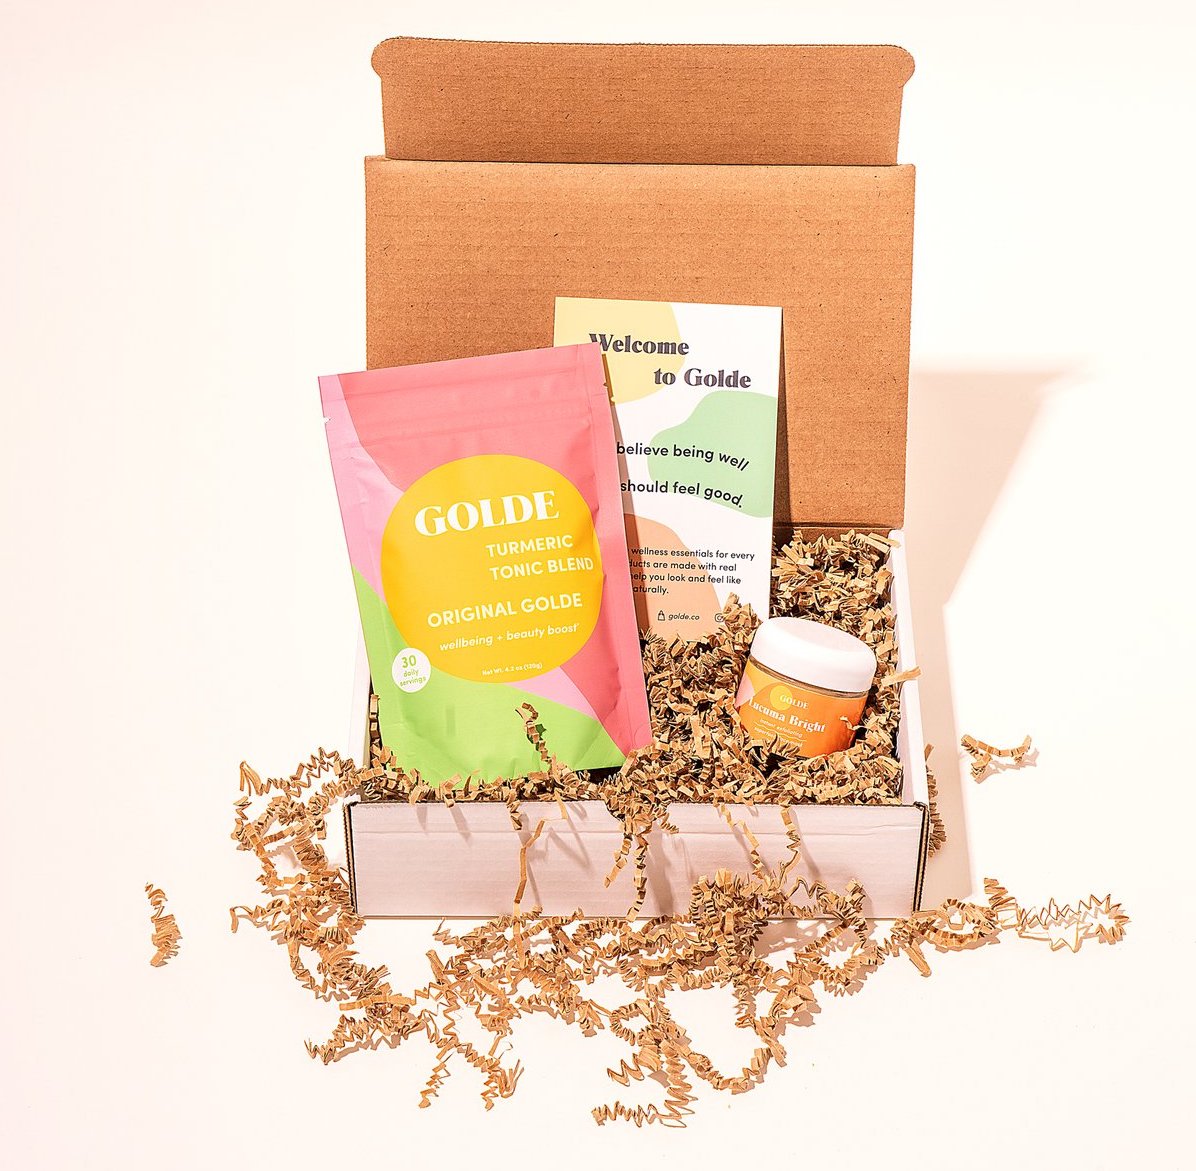 giftbox filled with GOLDE products